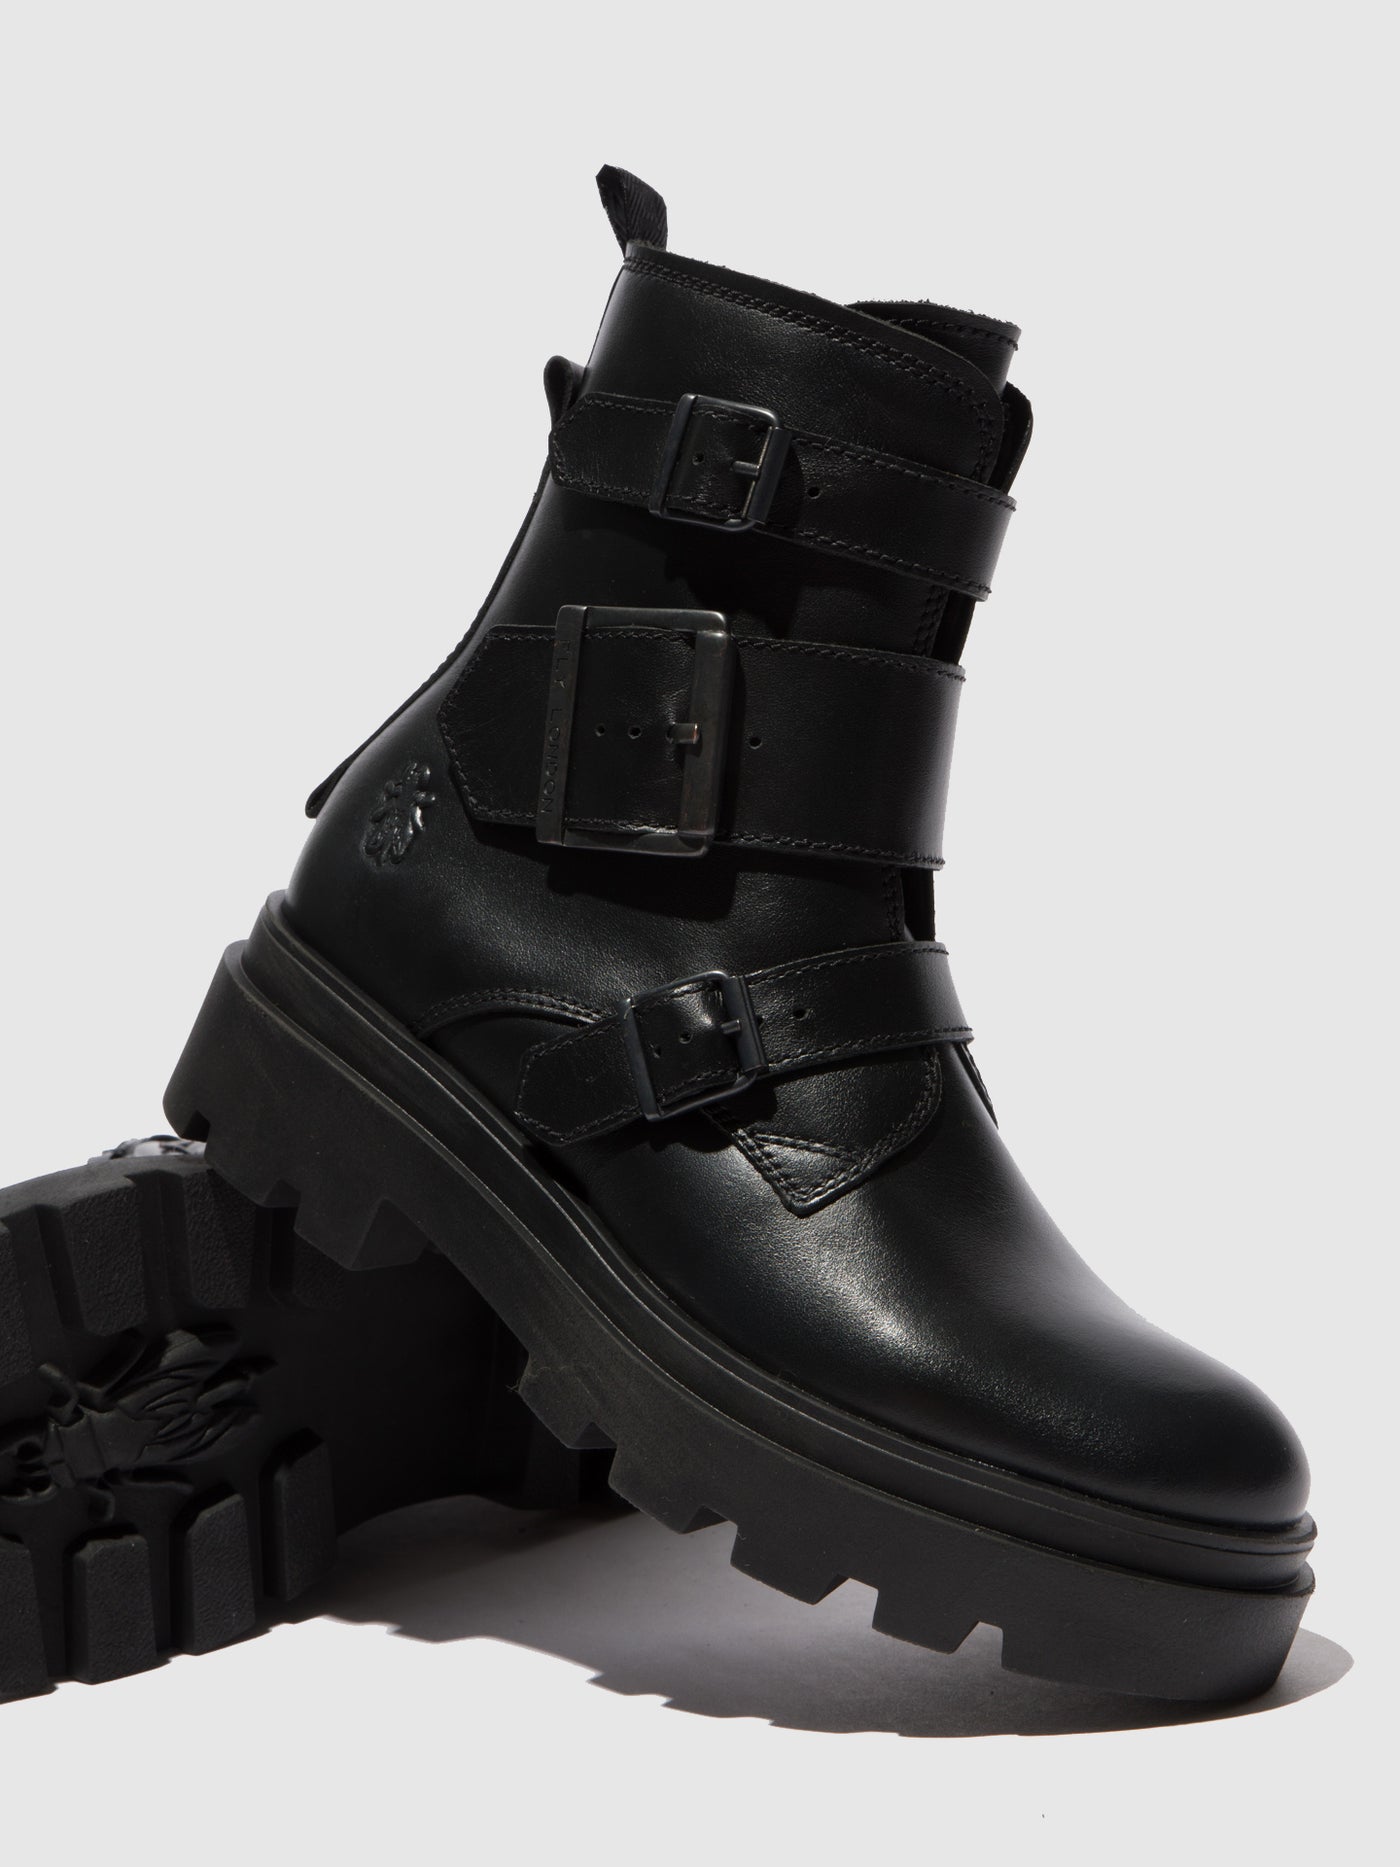 Buckle Ankle Boots JEDA817FLY NAPPA BLACK